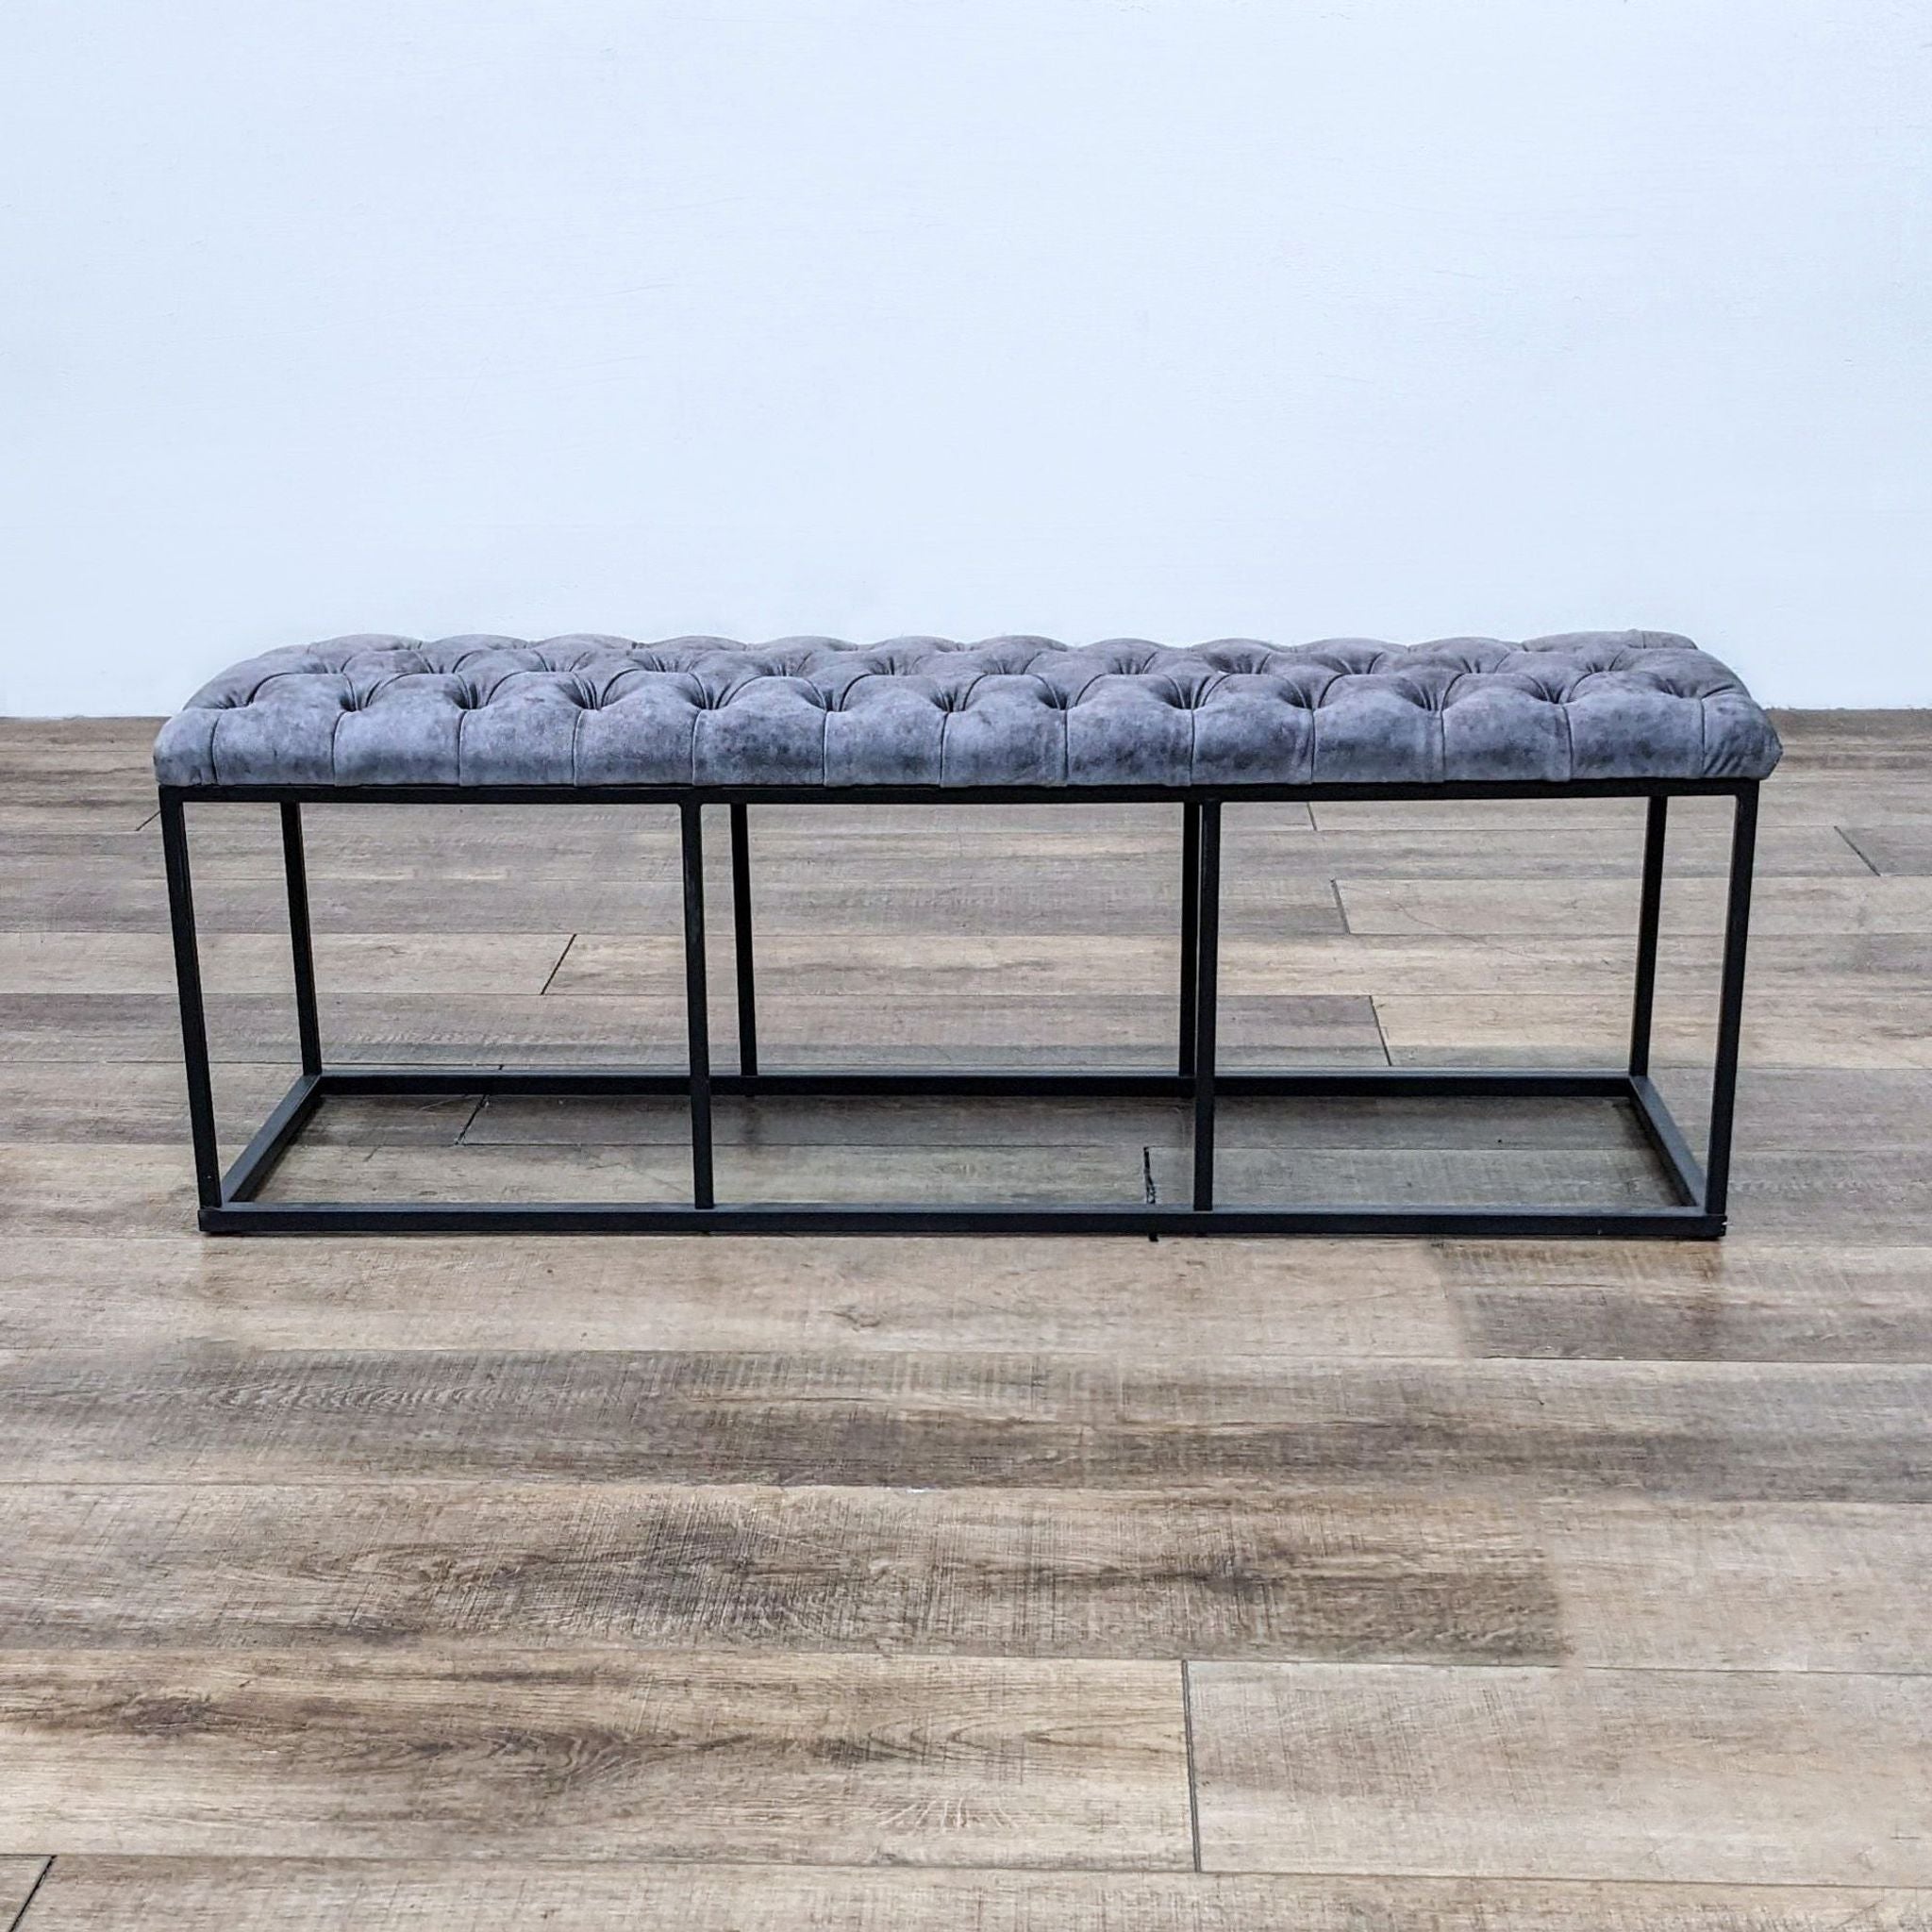 Reperch brand padded tufted top leather 52" bench with dark metal frame on wooden floor.